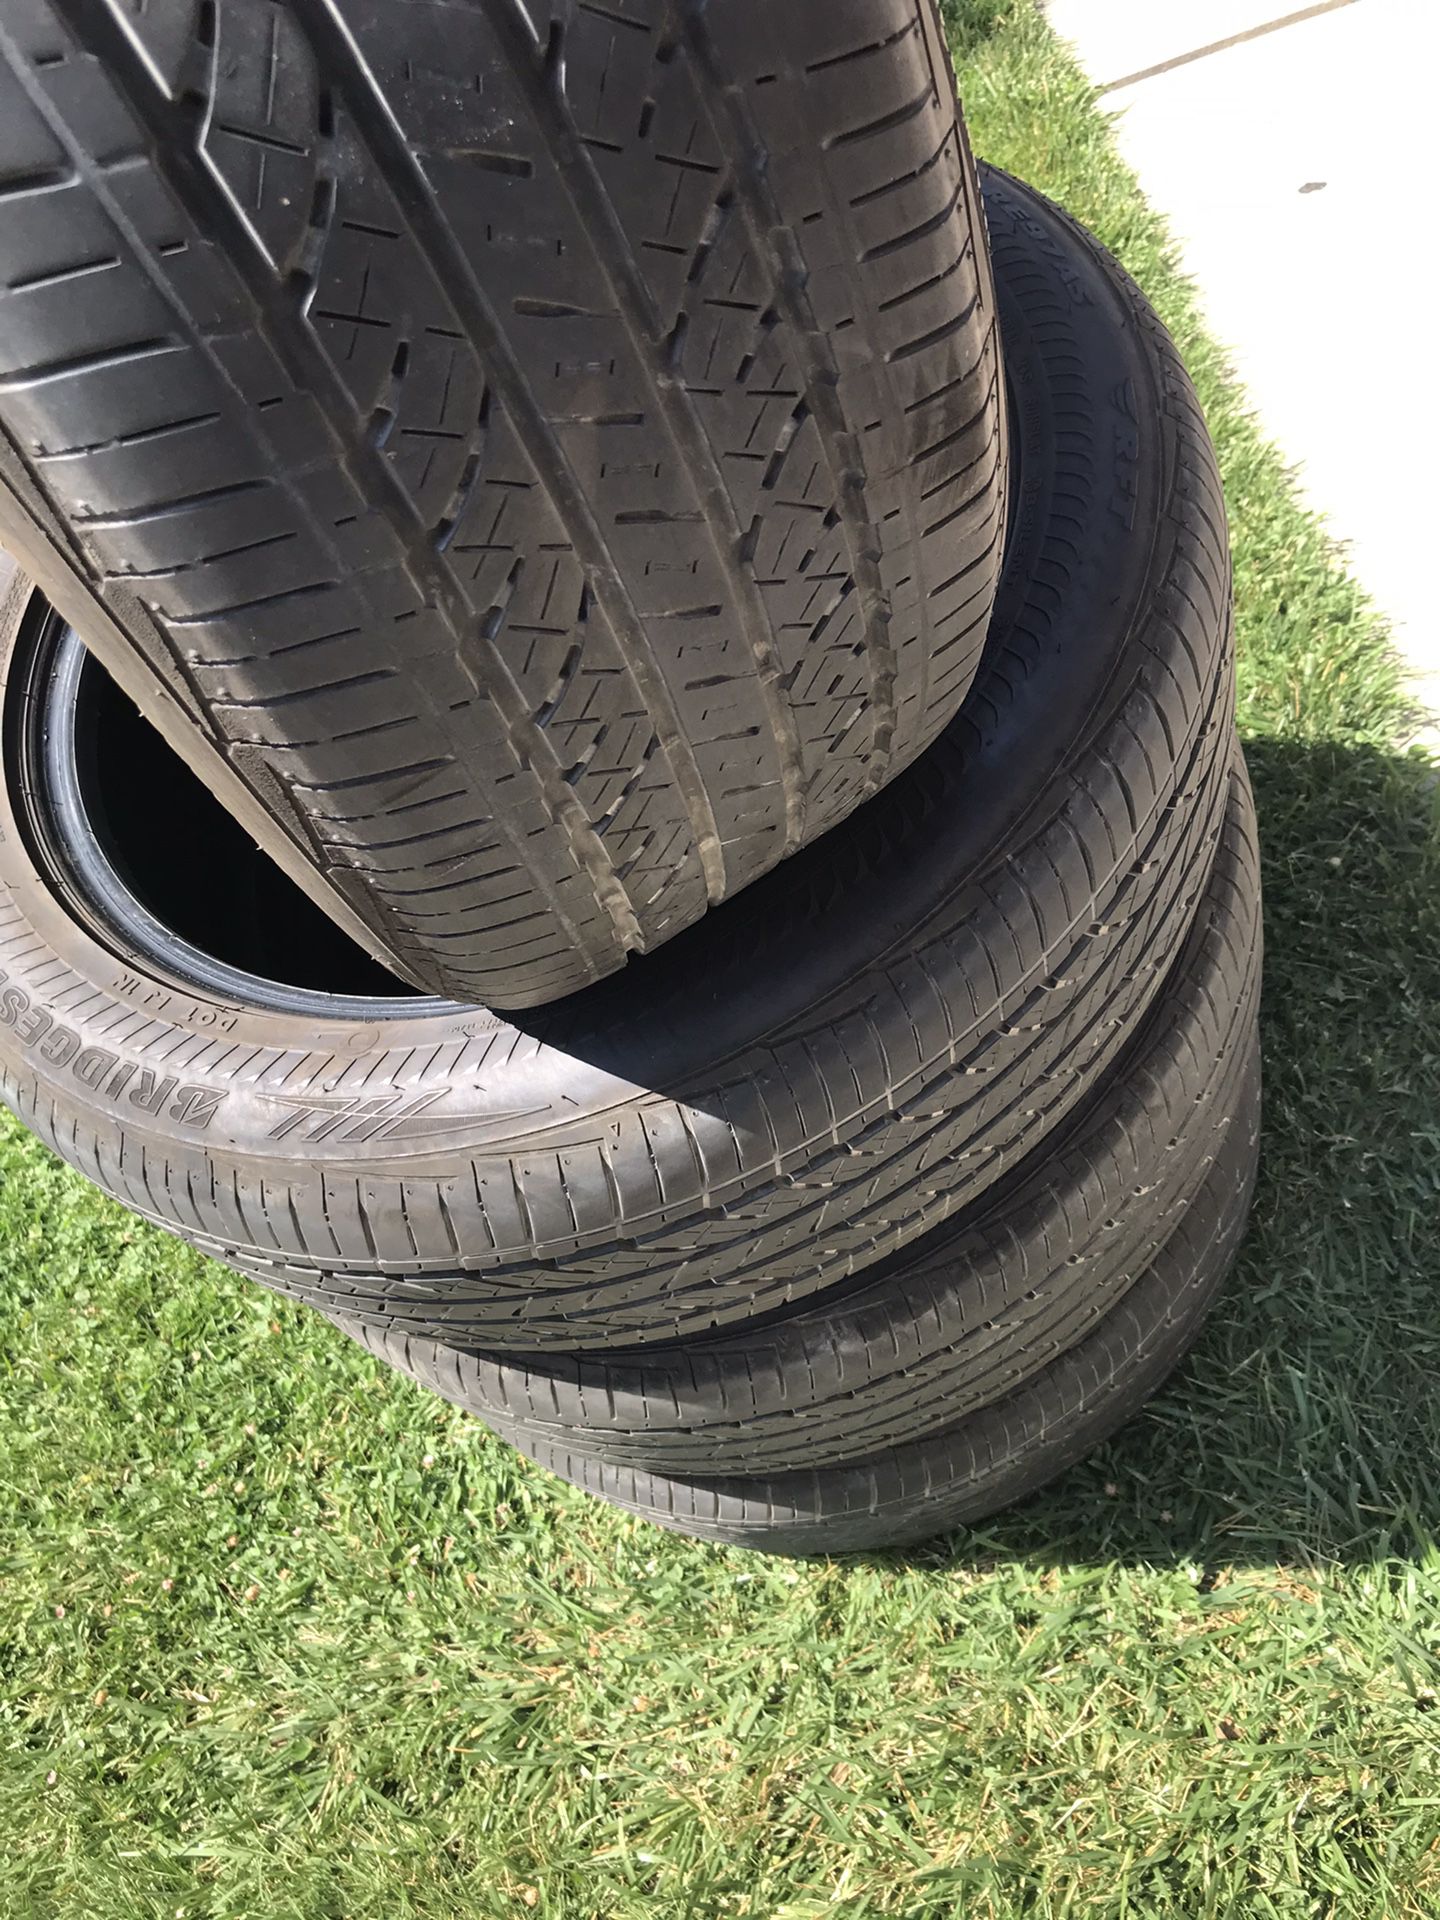 4 tires size 22555rf17 very nice tires